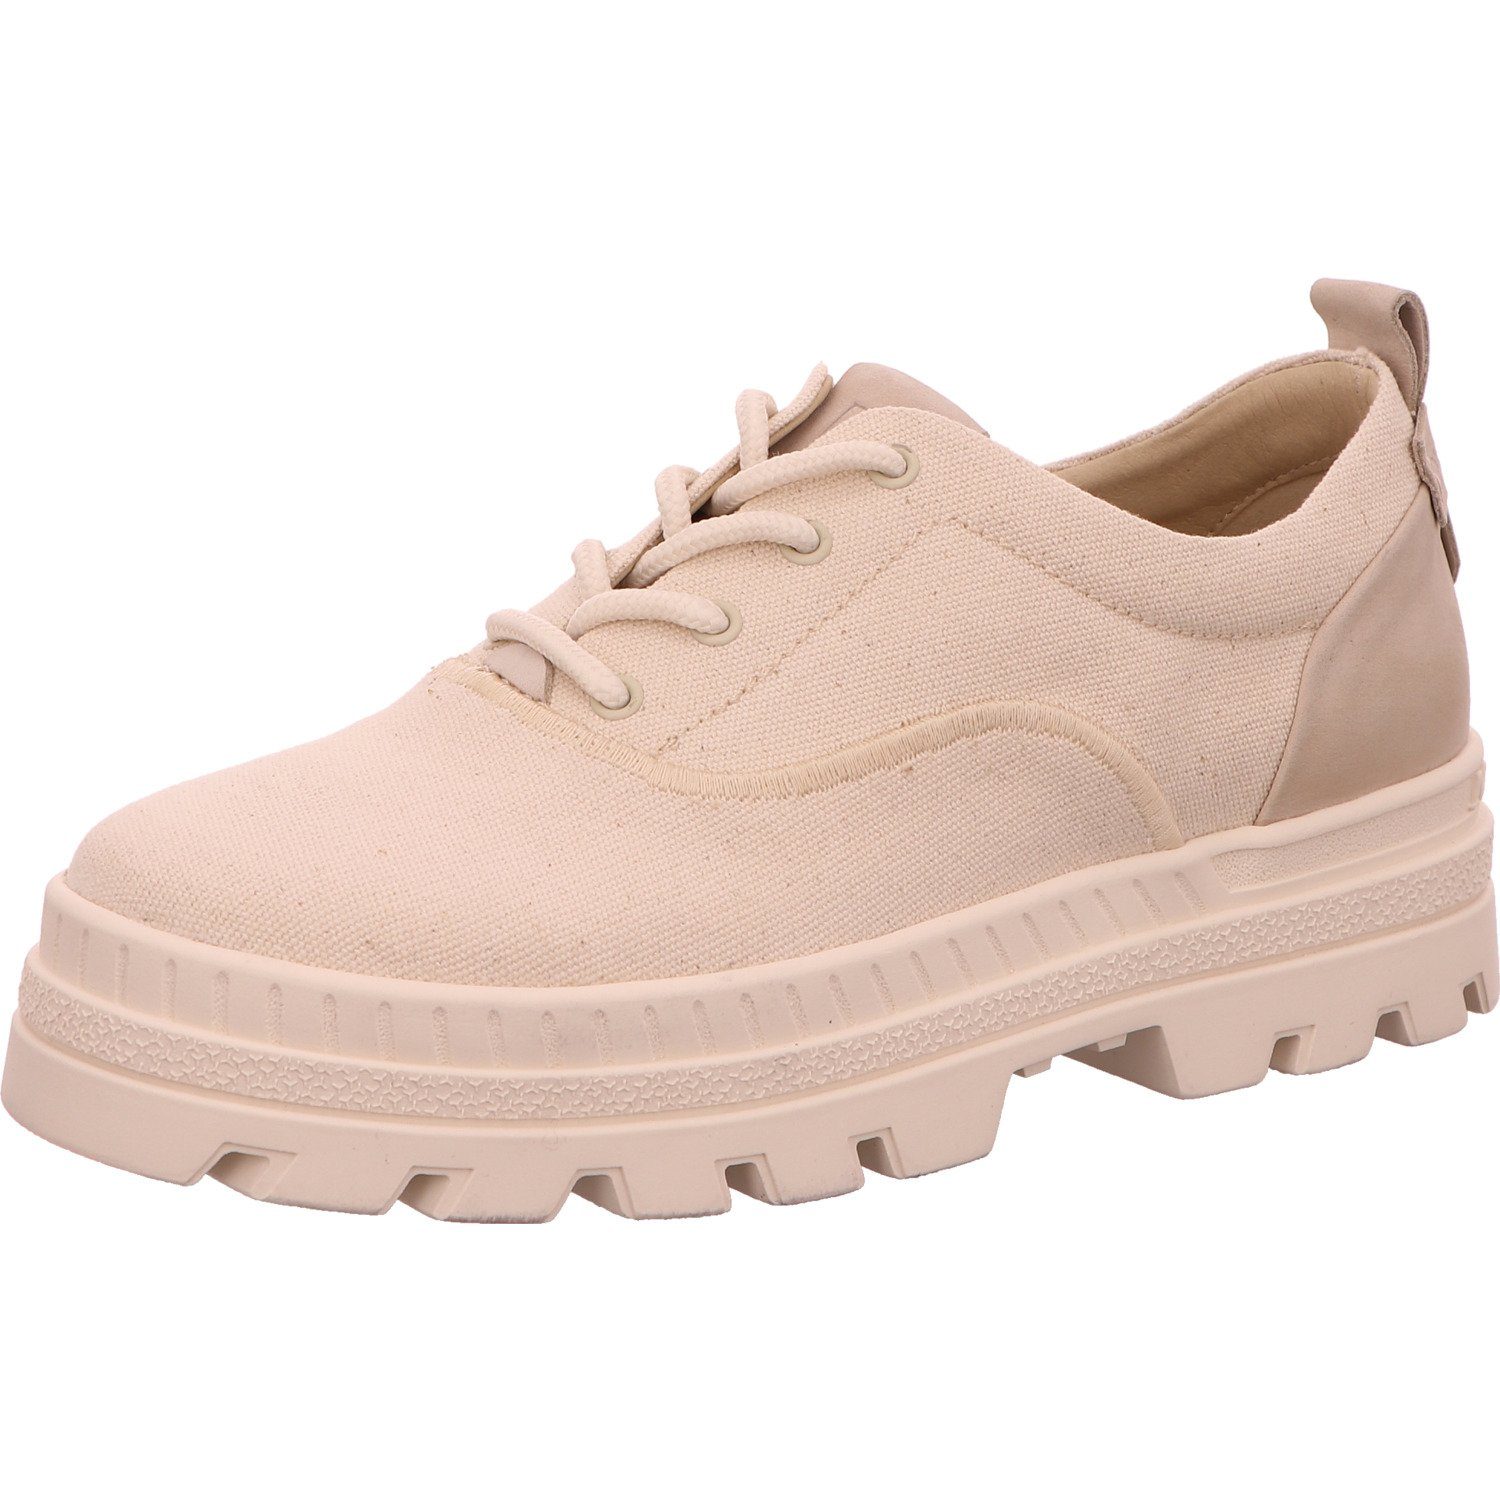 Marc O'Polo Sneaker Weiches Obermaterial